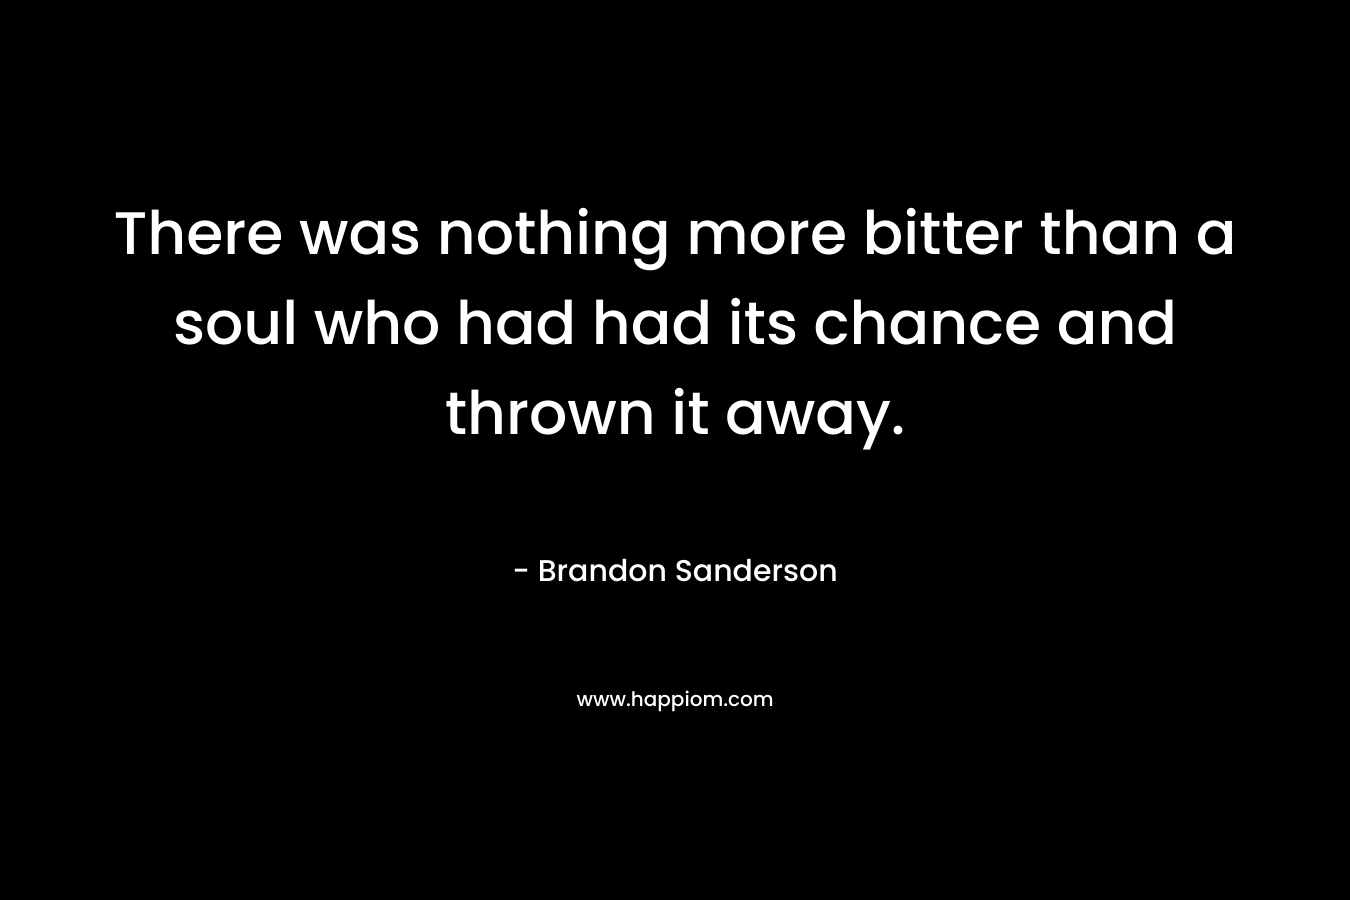 There was nothing more bitter than a soul who had had its chance and thrown it away.